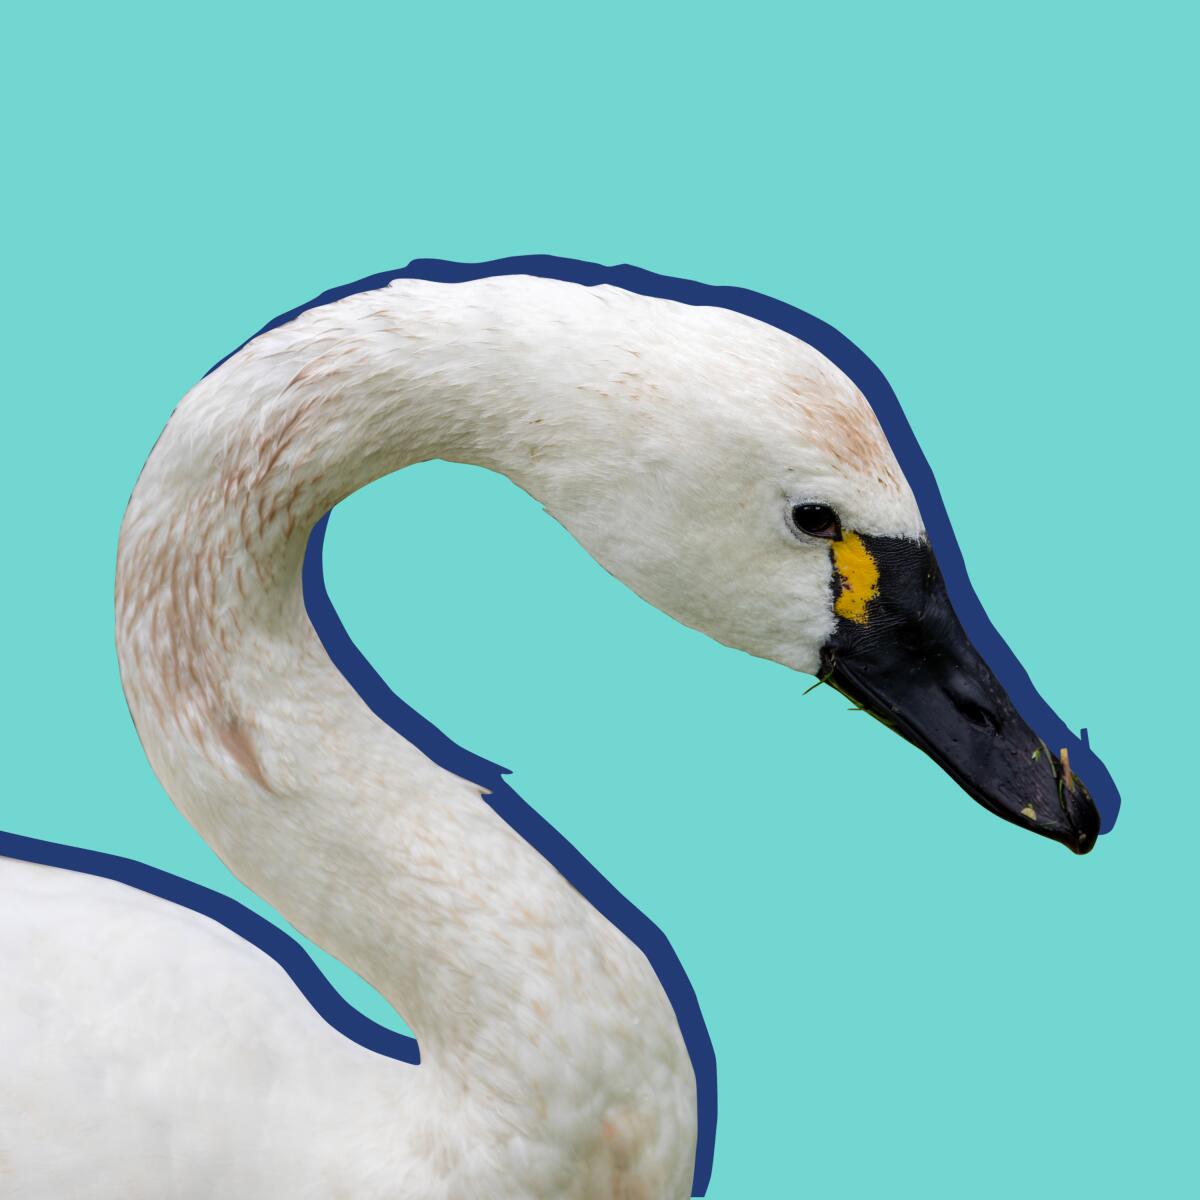 A photo illustration of a swan's neck and head